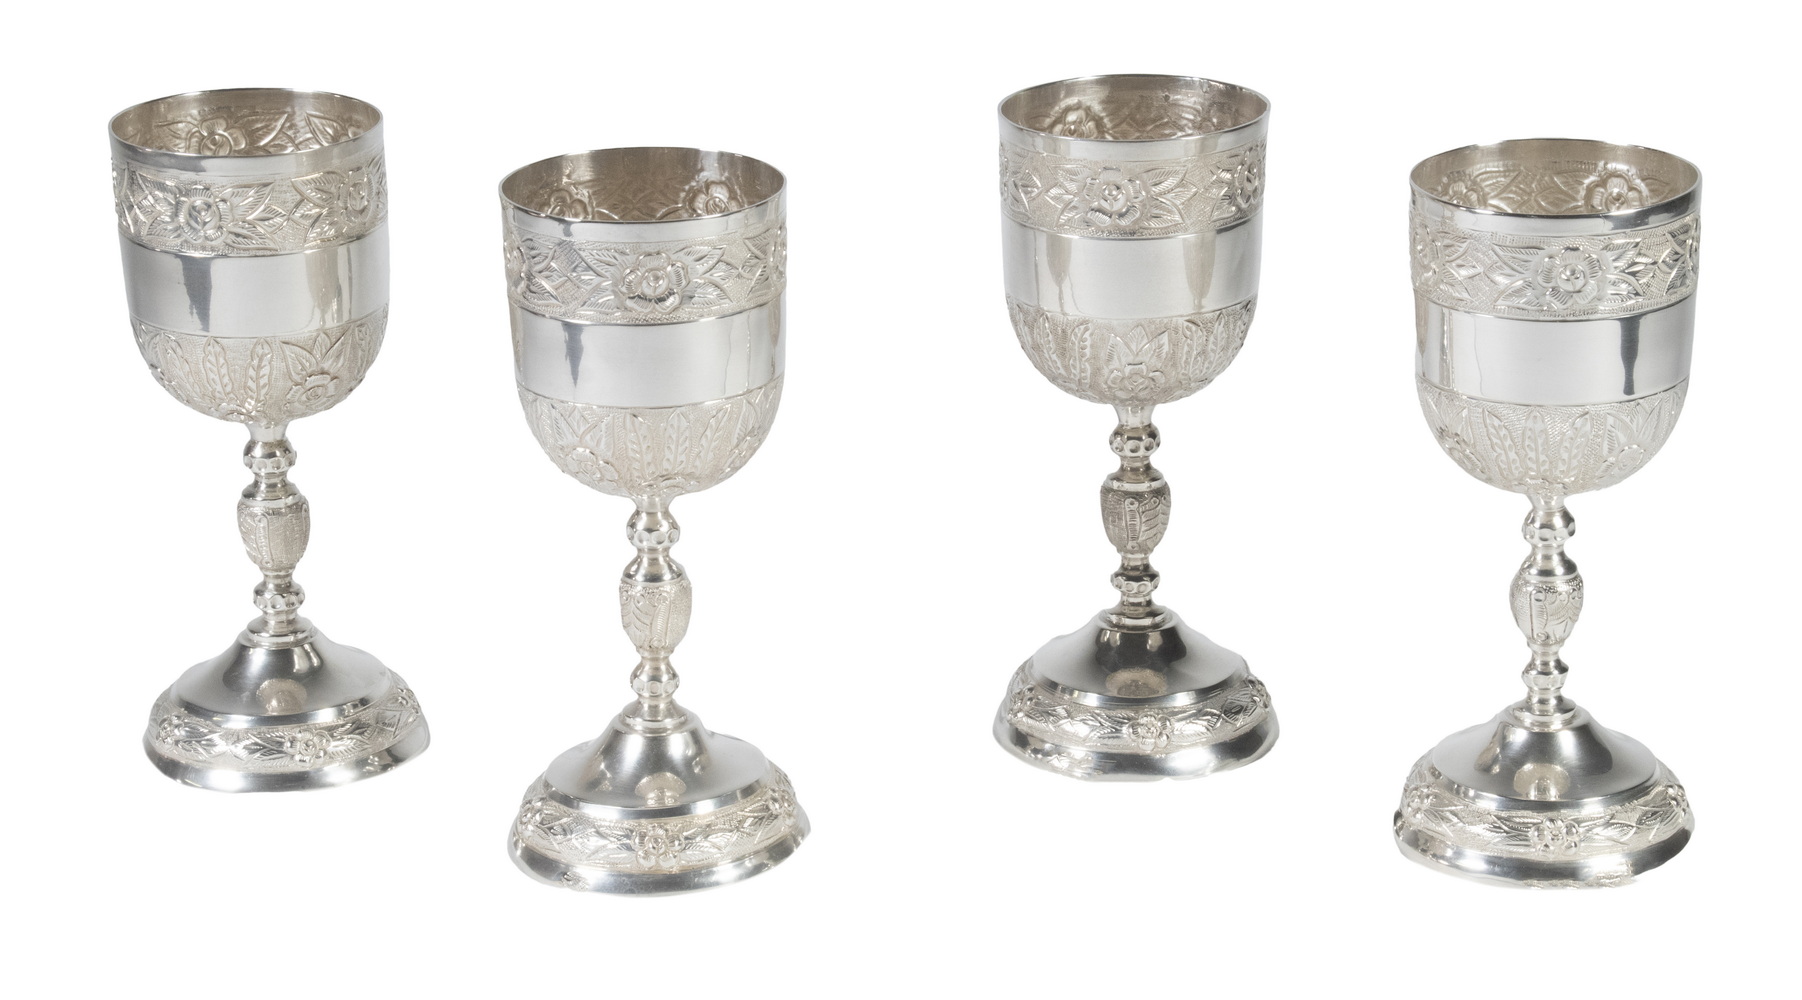 SANBORN'S MEXICAN STERLING GOBLETS